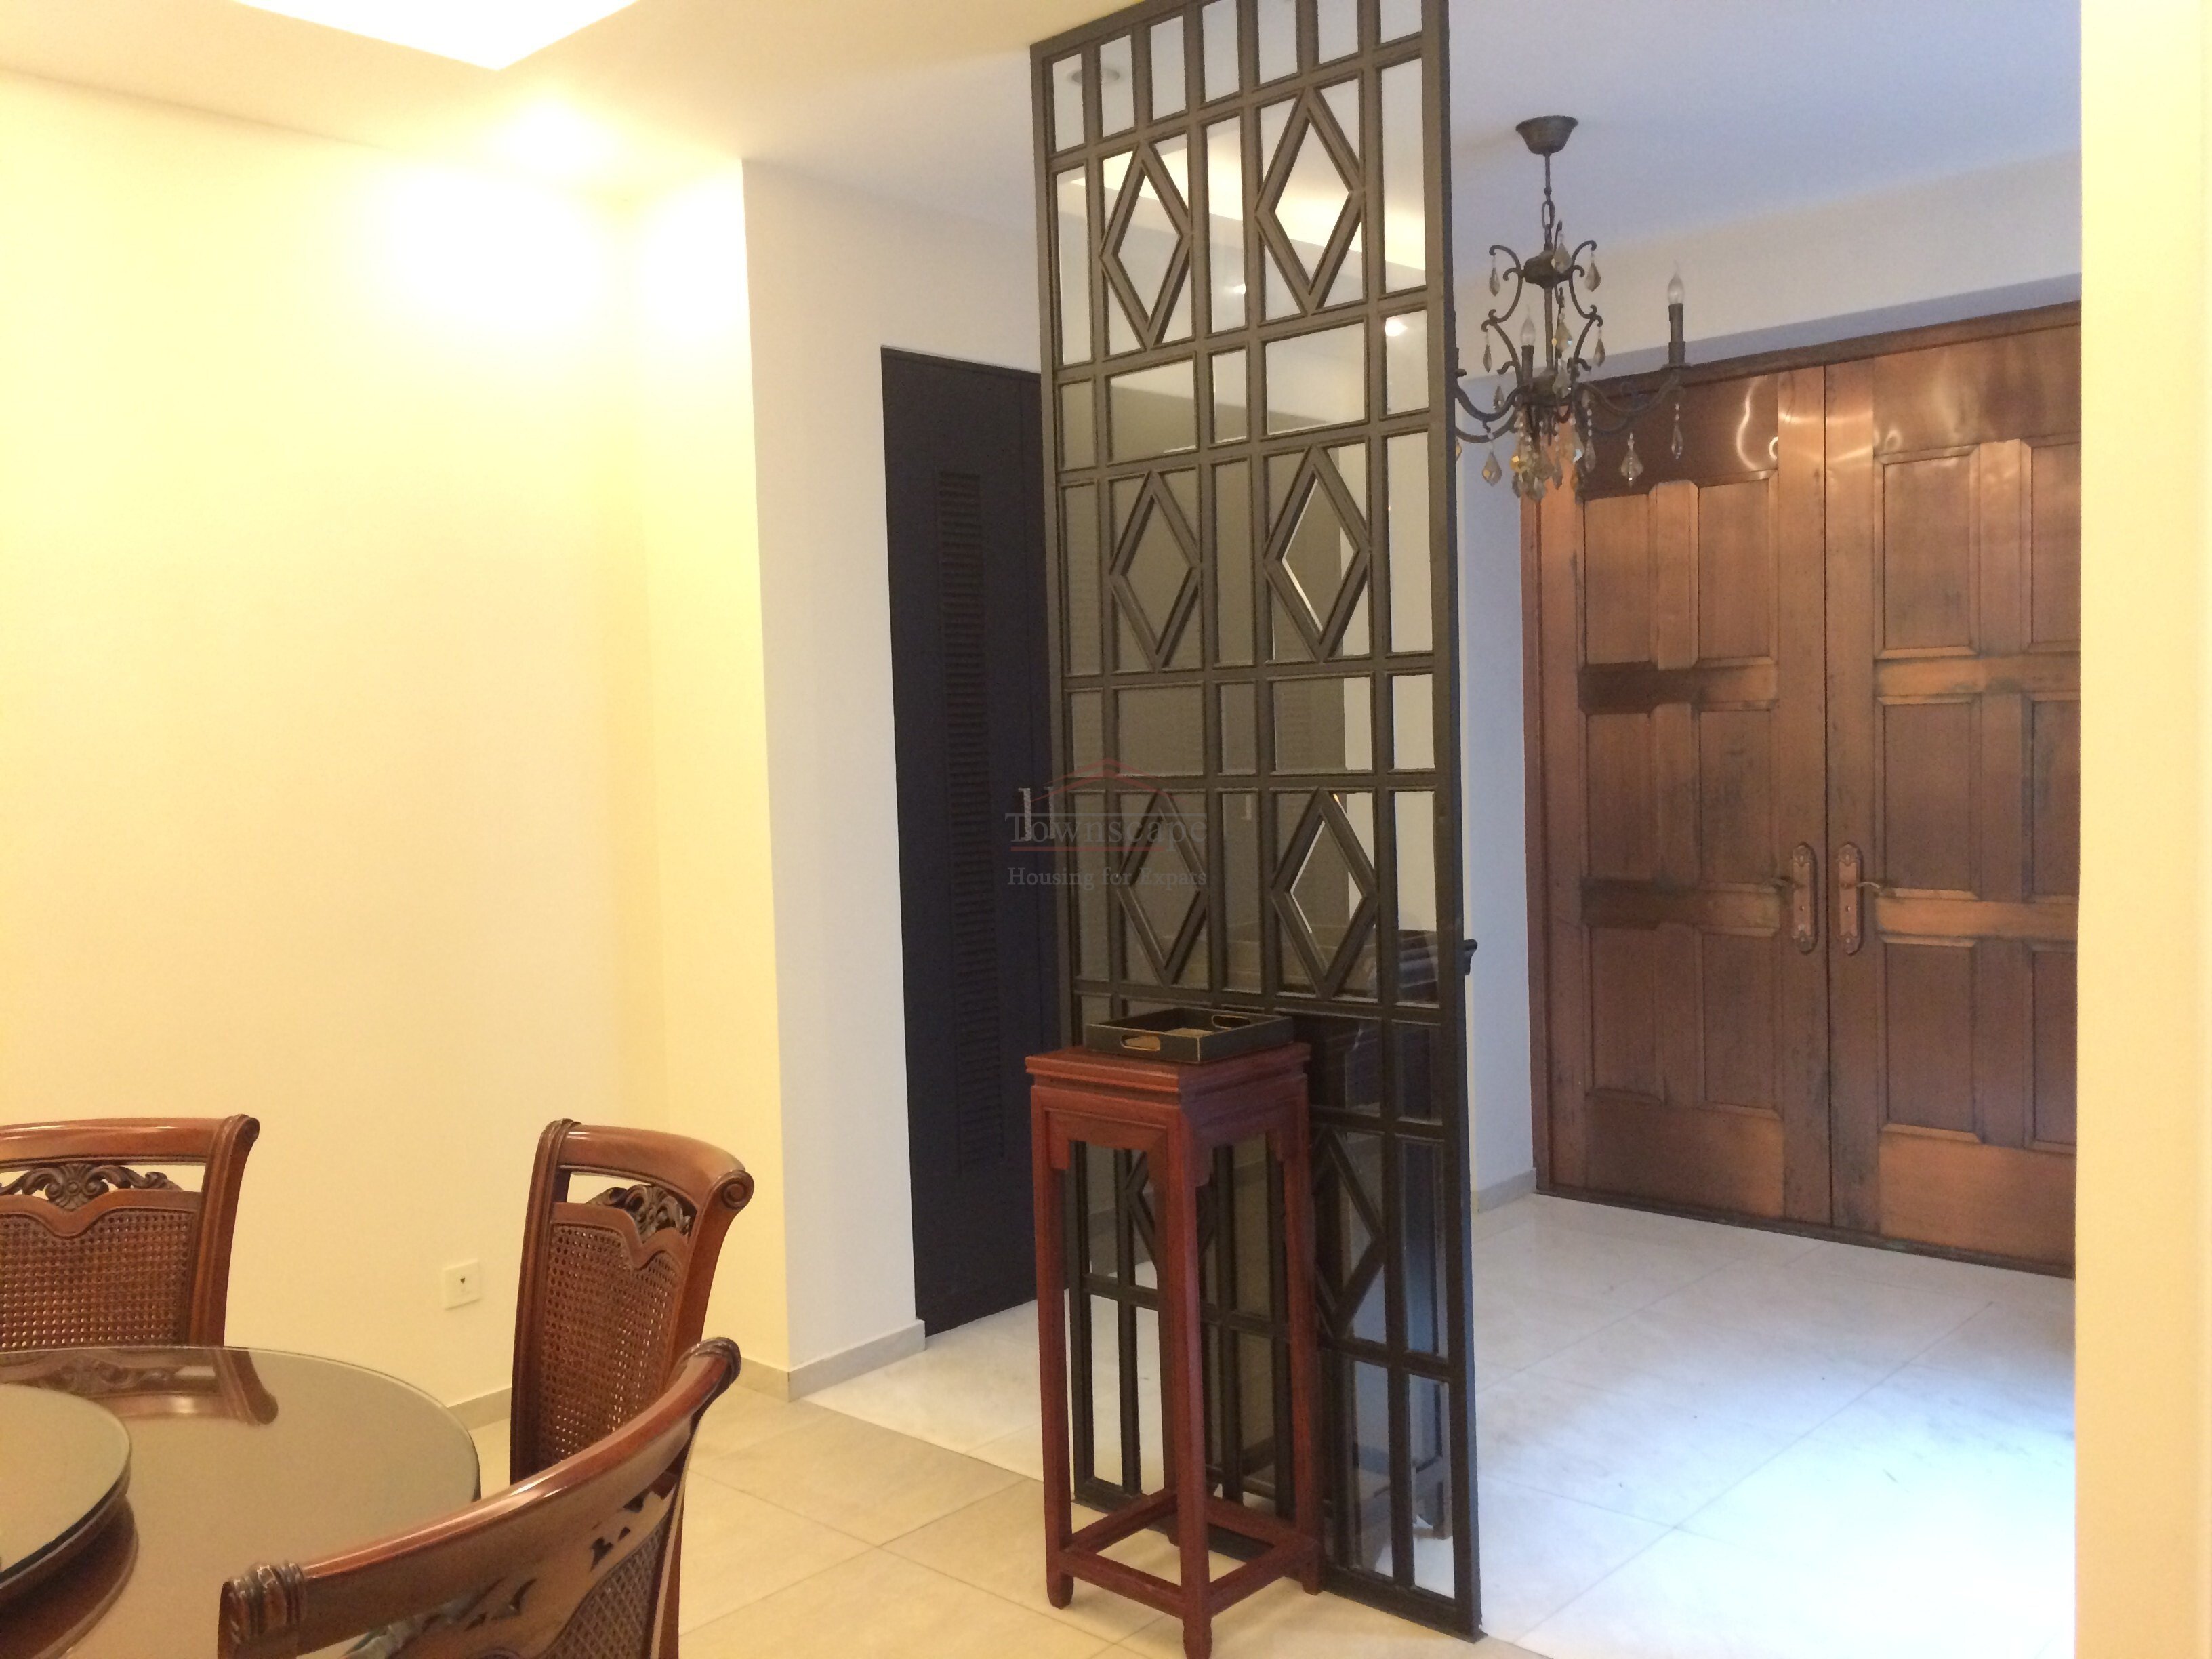 3 floor lane house french concession 5 br newly renovated lane house in French Concession